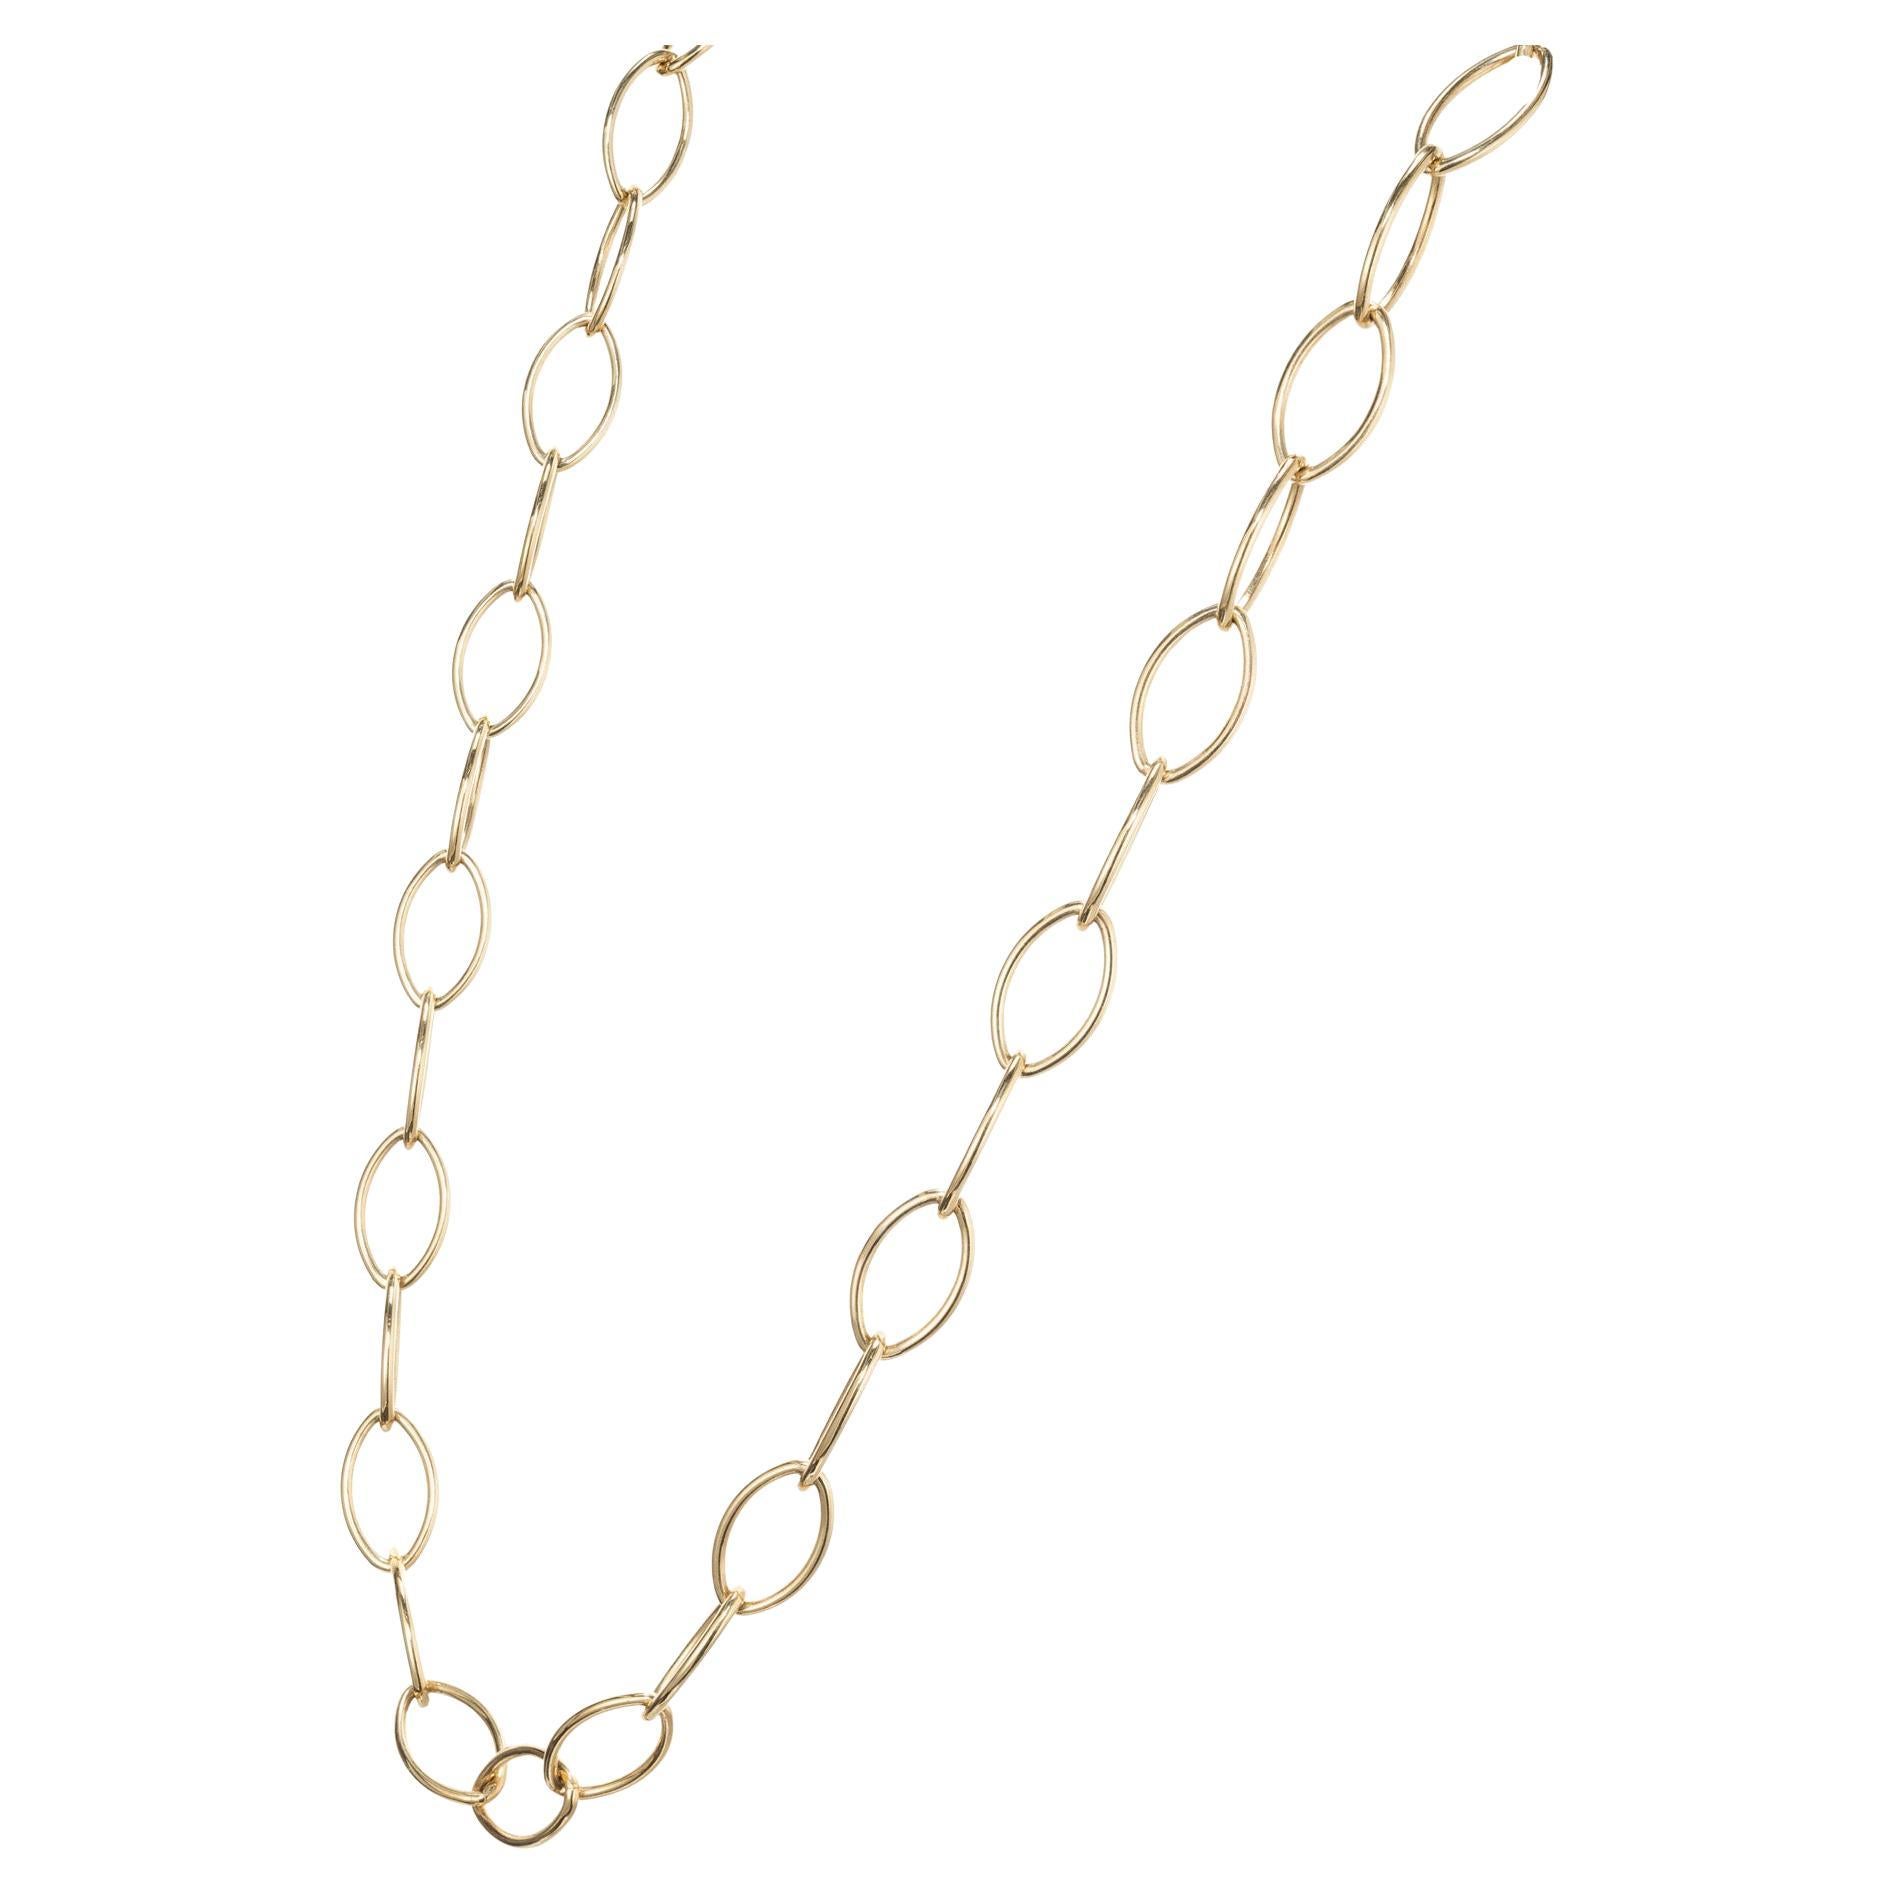 Tiffany & Co. 18k Yellow Gold Oval Link Necklace